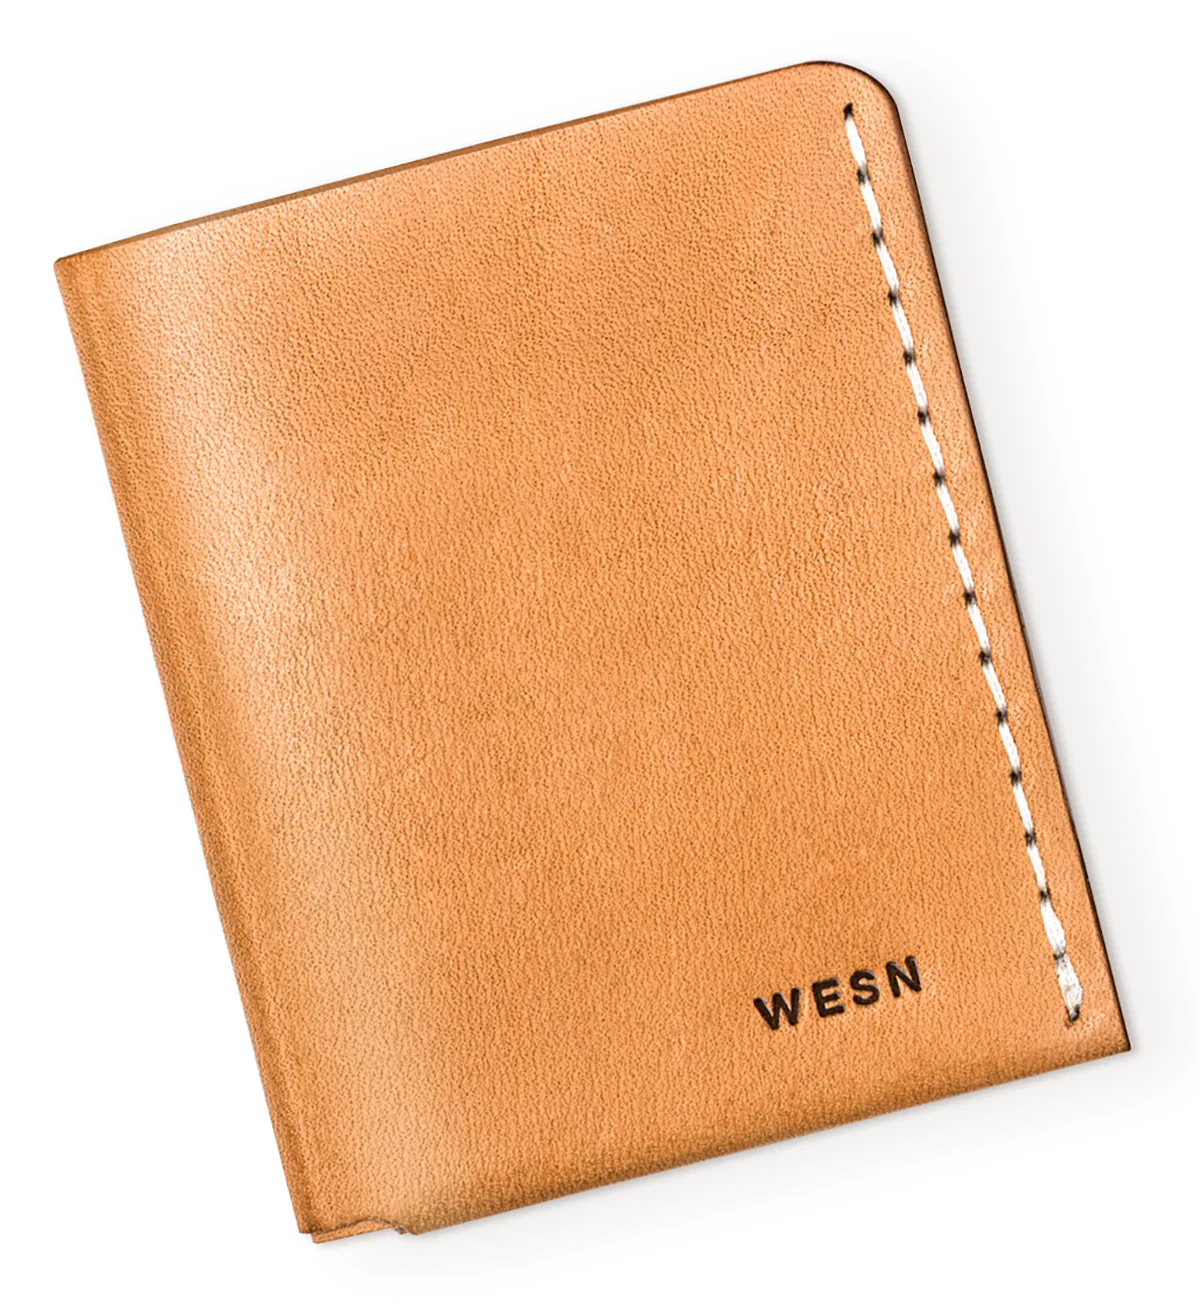 The Forsta Leather Wallet